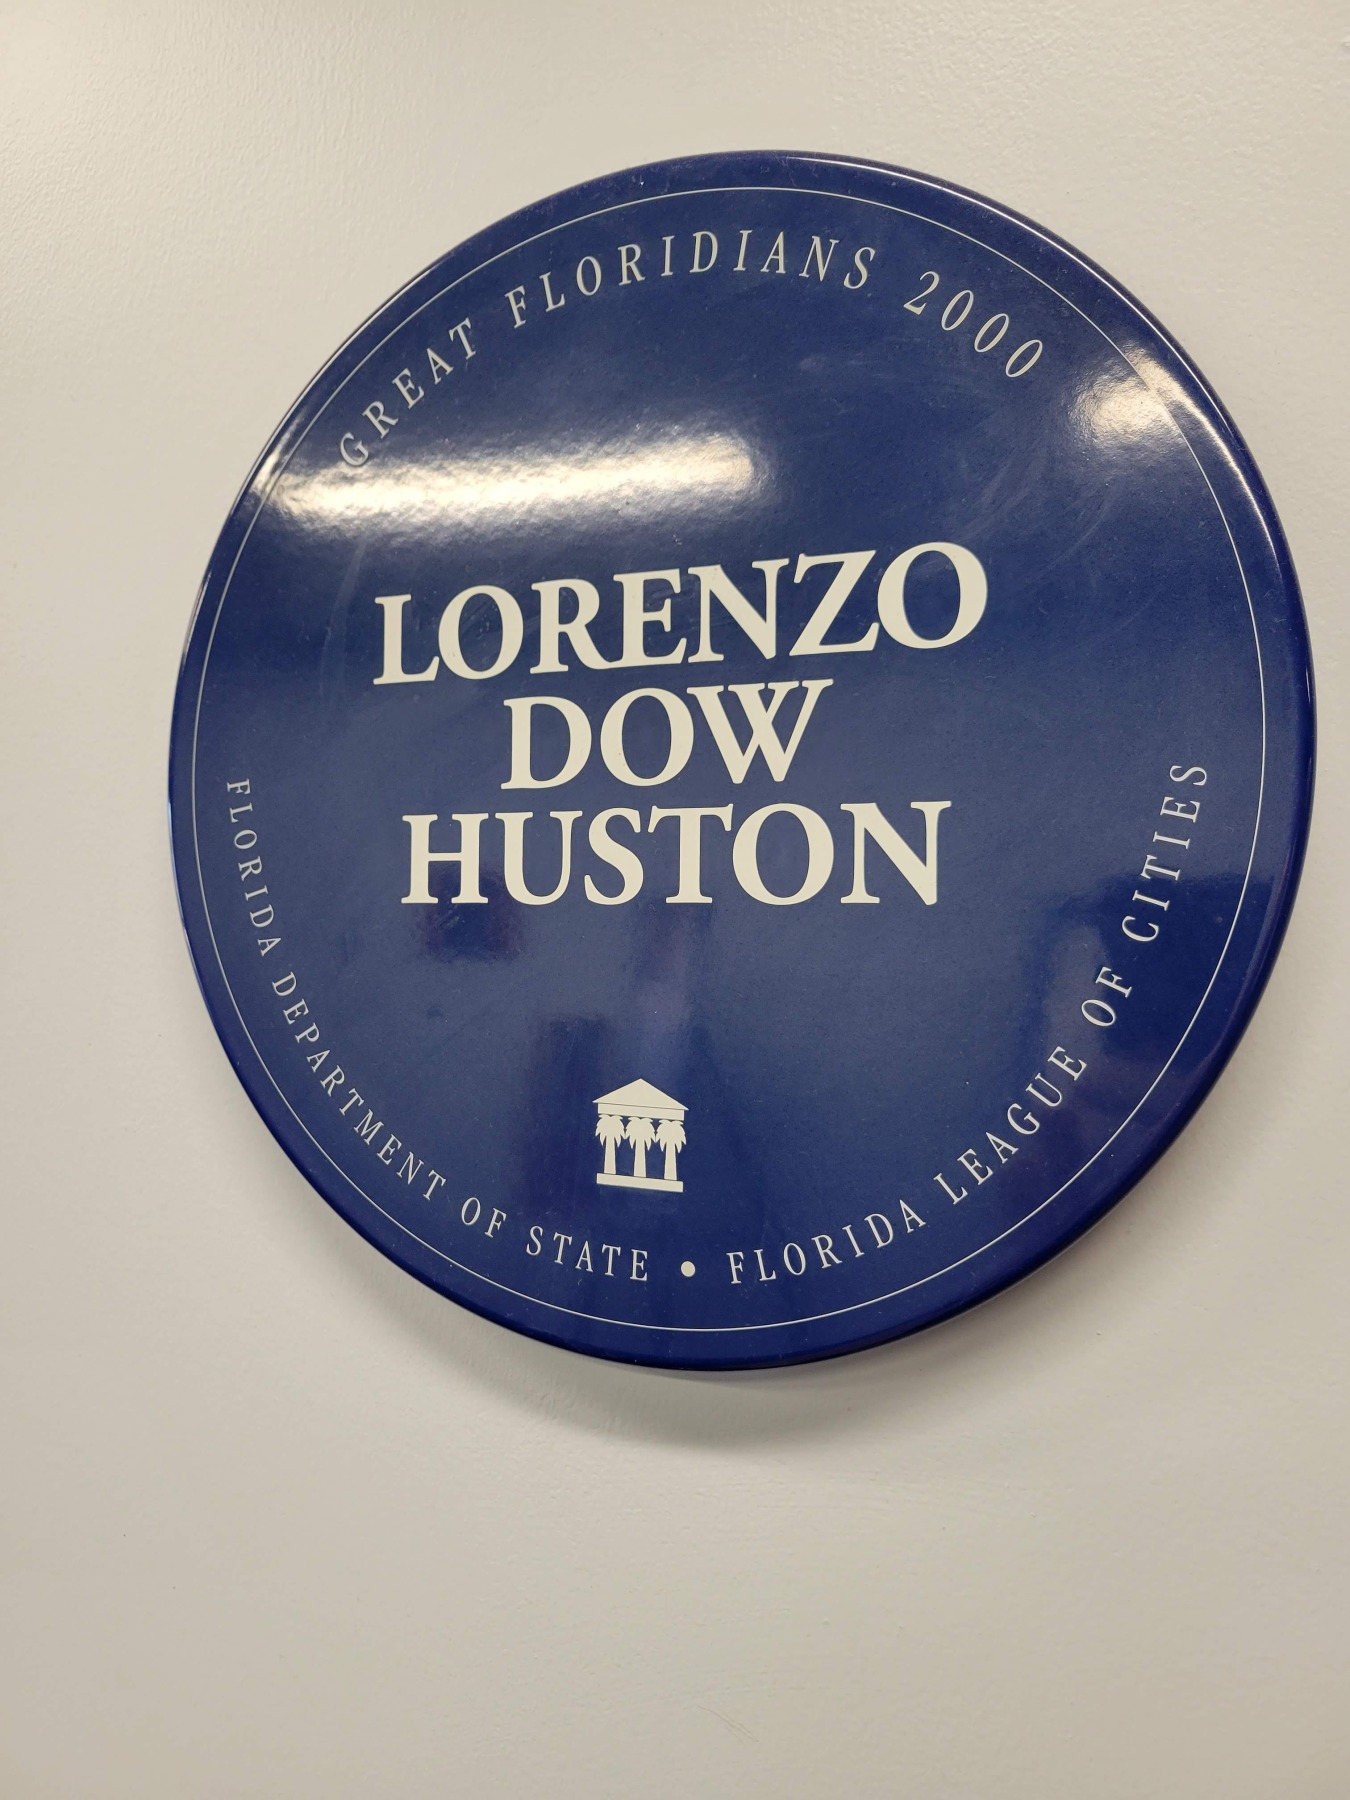 Lorenzo Dow Huston Great Floridians 2000 marker at the City Island Library in Daytona Beach